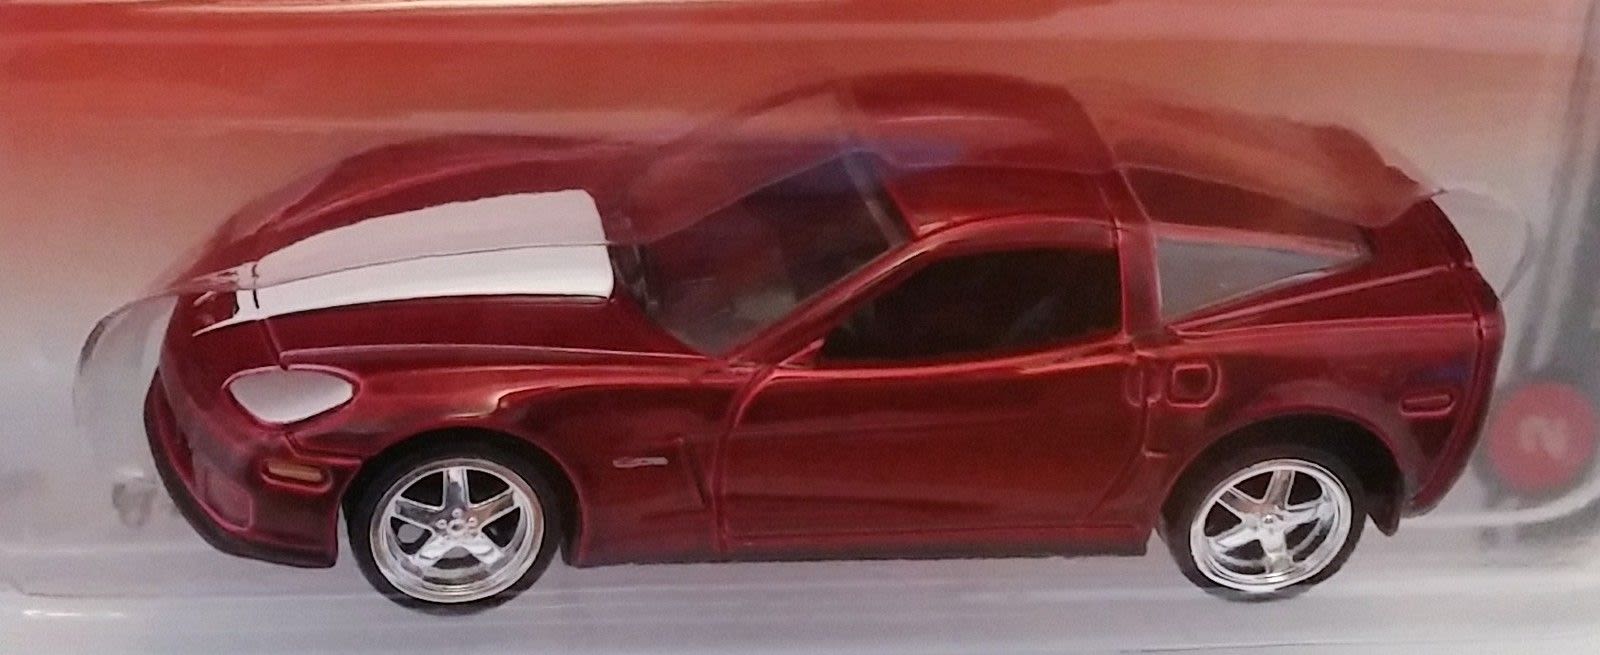 Illustration for article titled Diecast Chase Cars by brand